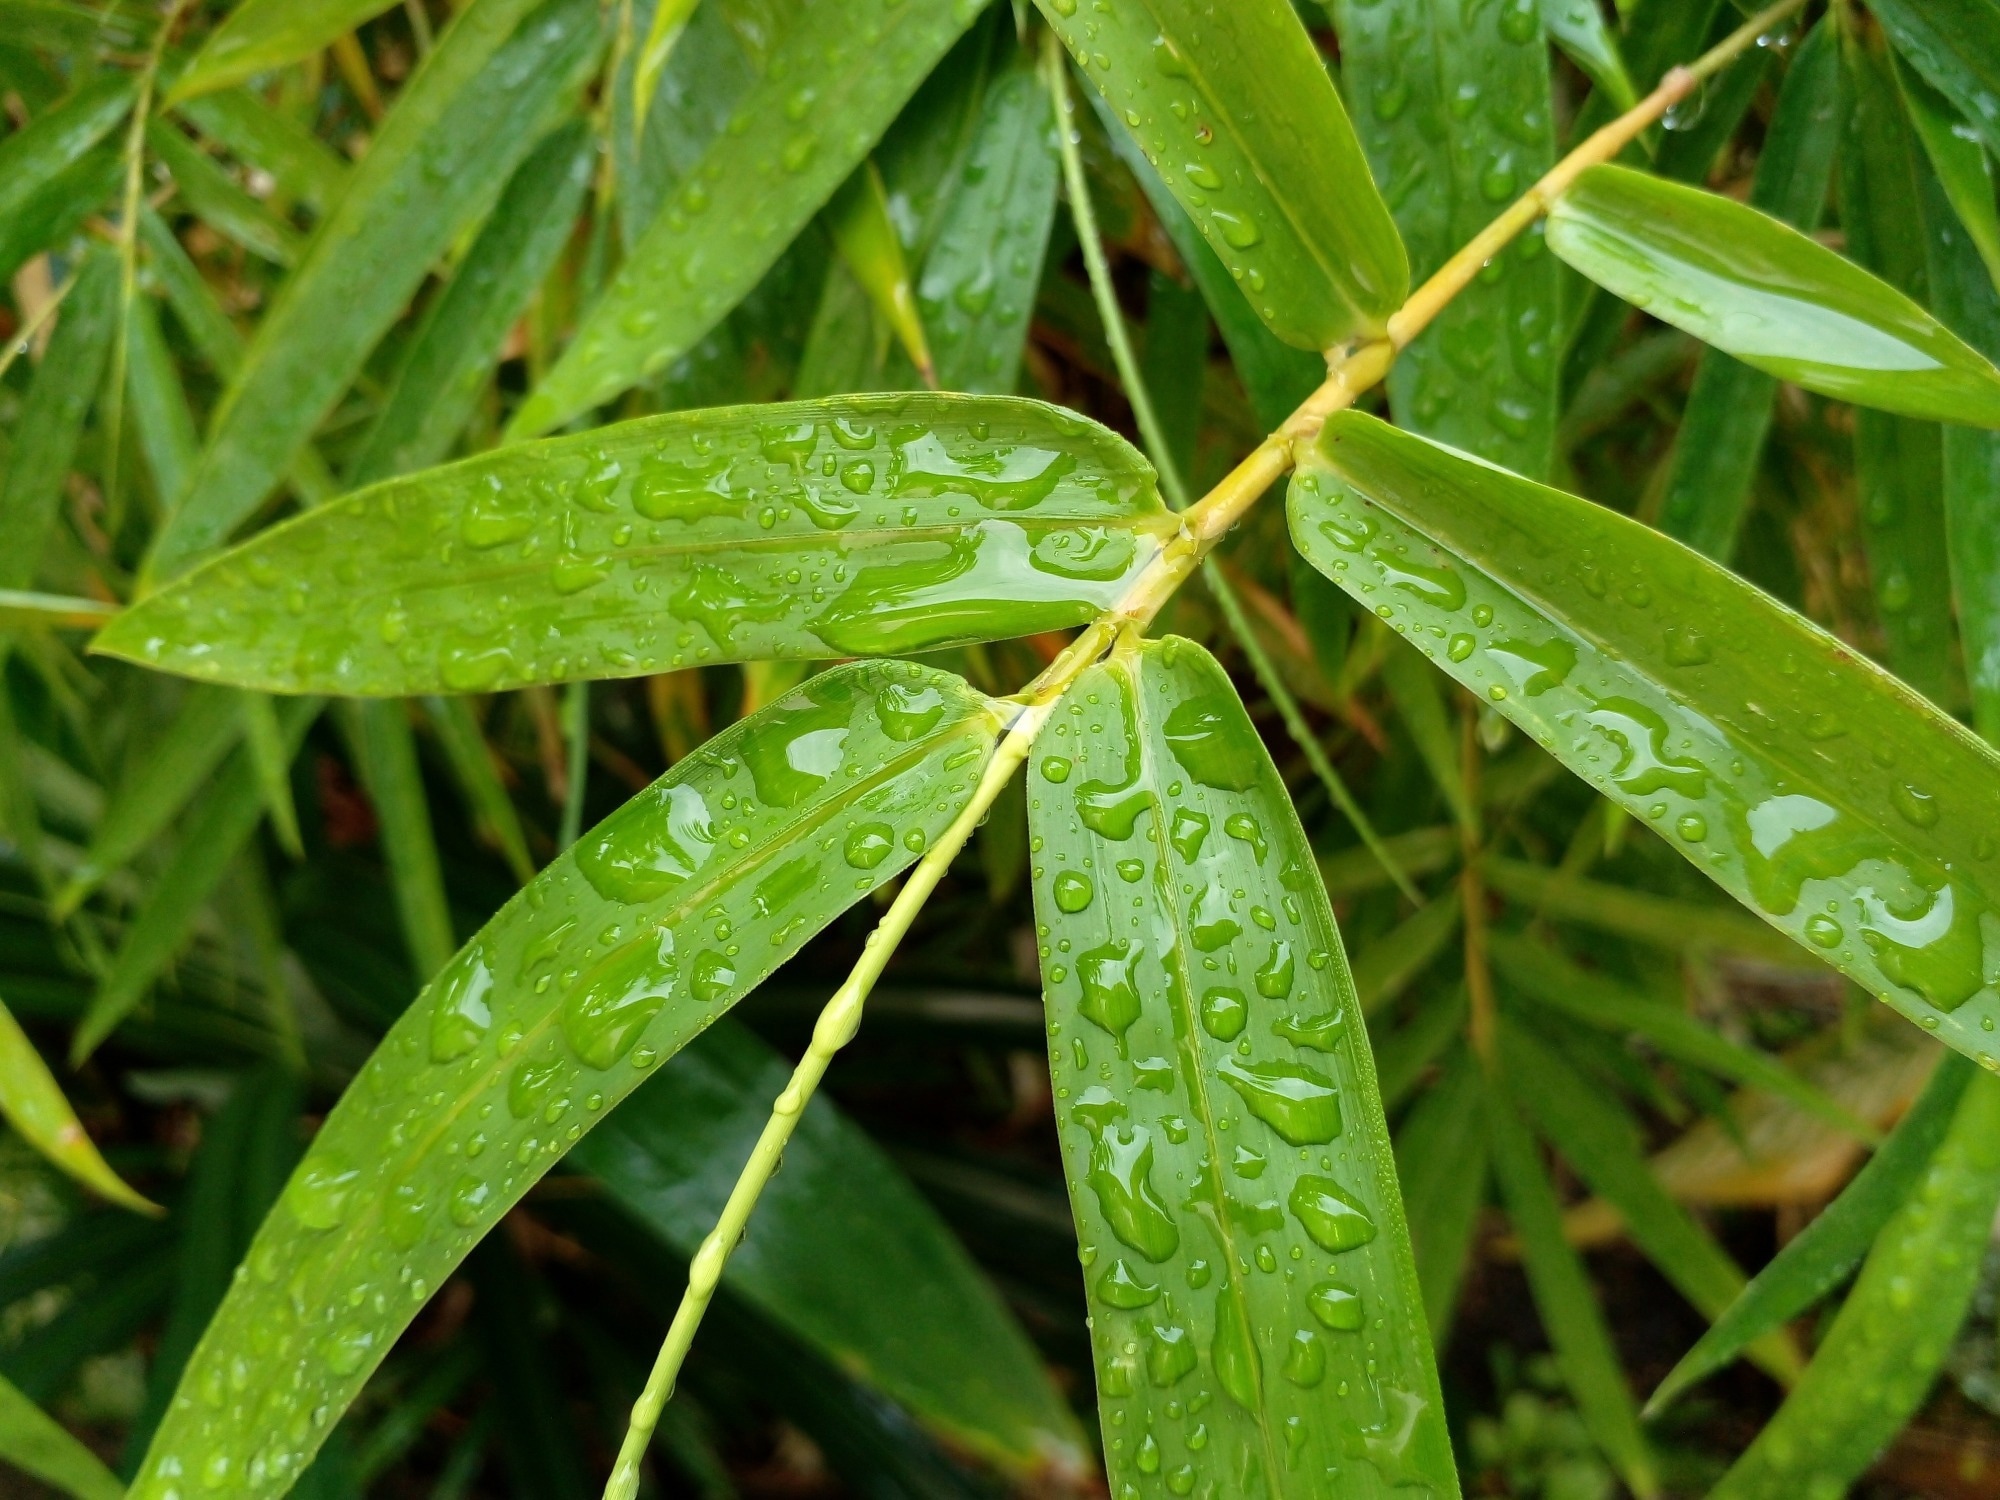 Comparative assessment of the antioxidant potential of bamboo